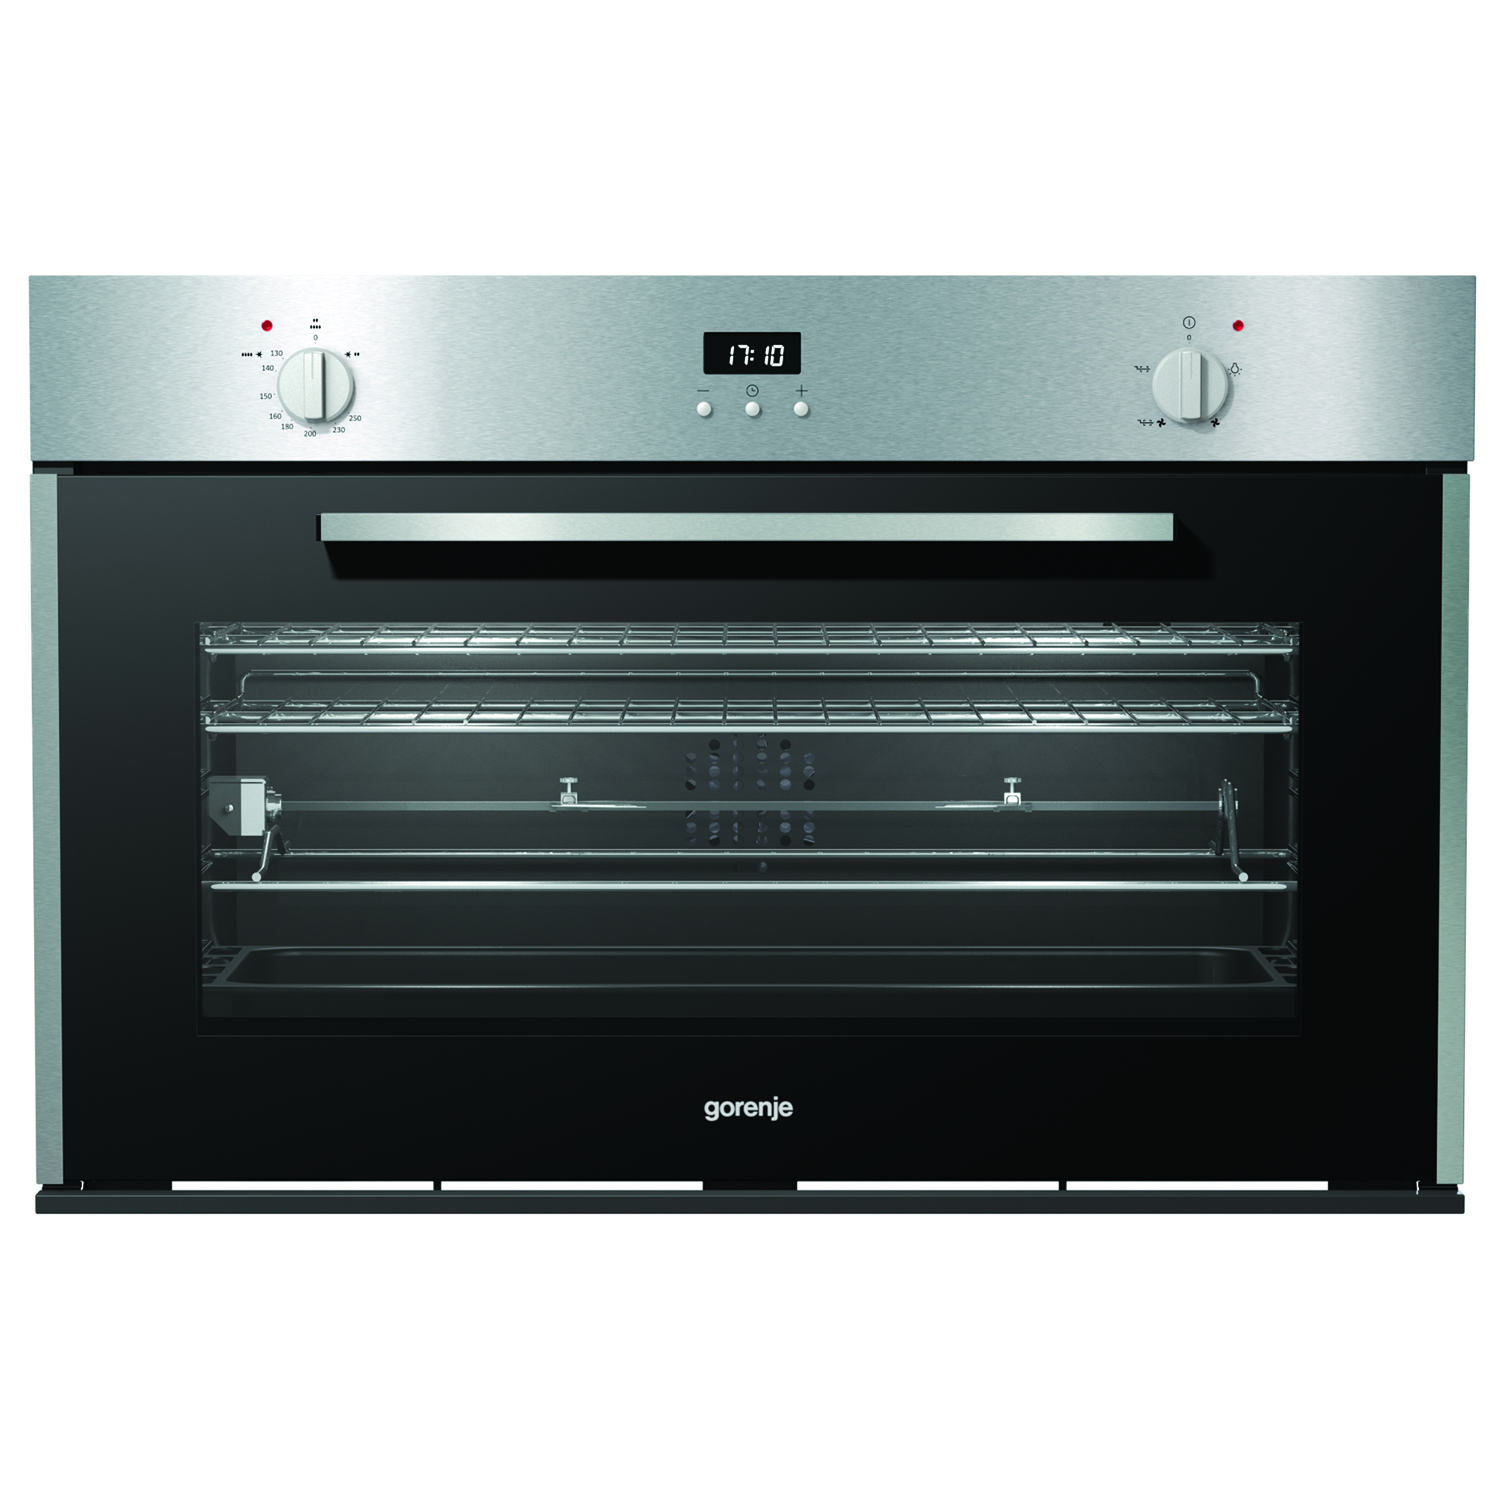 BOG932E10FX - Gorenje Gas oven 90 cm with gas grill, stainless steel BOG932E10FX